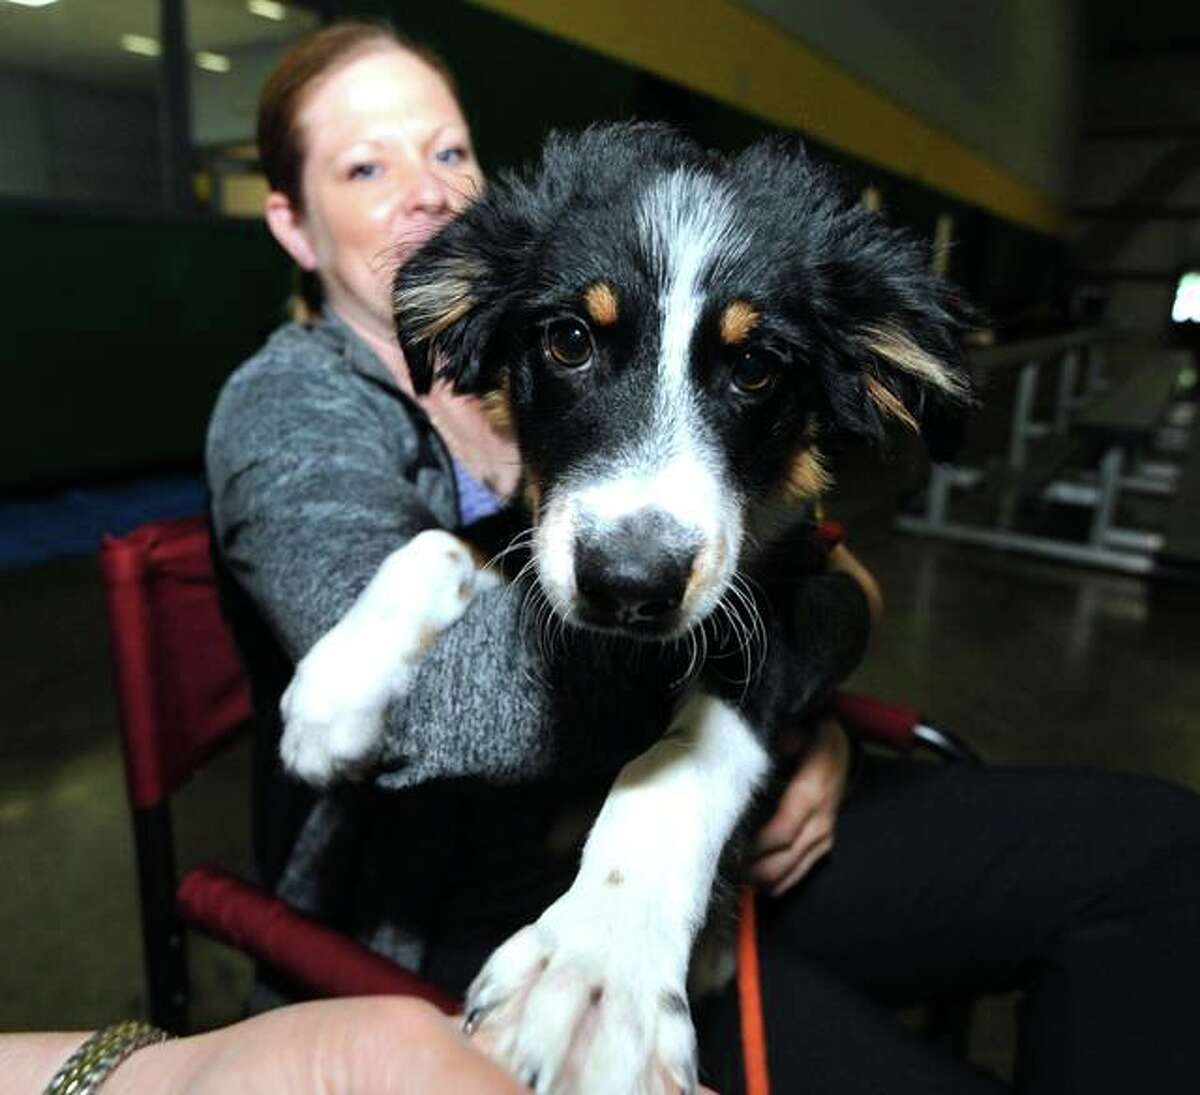 Australian Shepard Odin, 6 weeks, sits on his owner’s lap, Cathy Harmon, of Columbia, Missouri, at the Greater St. Louis Agility competition at the Sports Academy in Glen Carbon. Odin was not competing, but his owner’s other dogs were. He came to see how it was done.